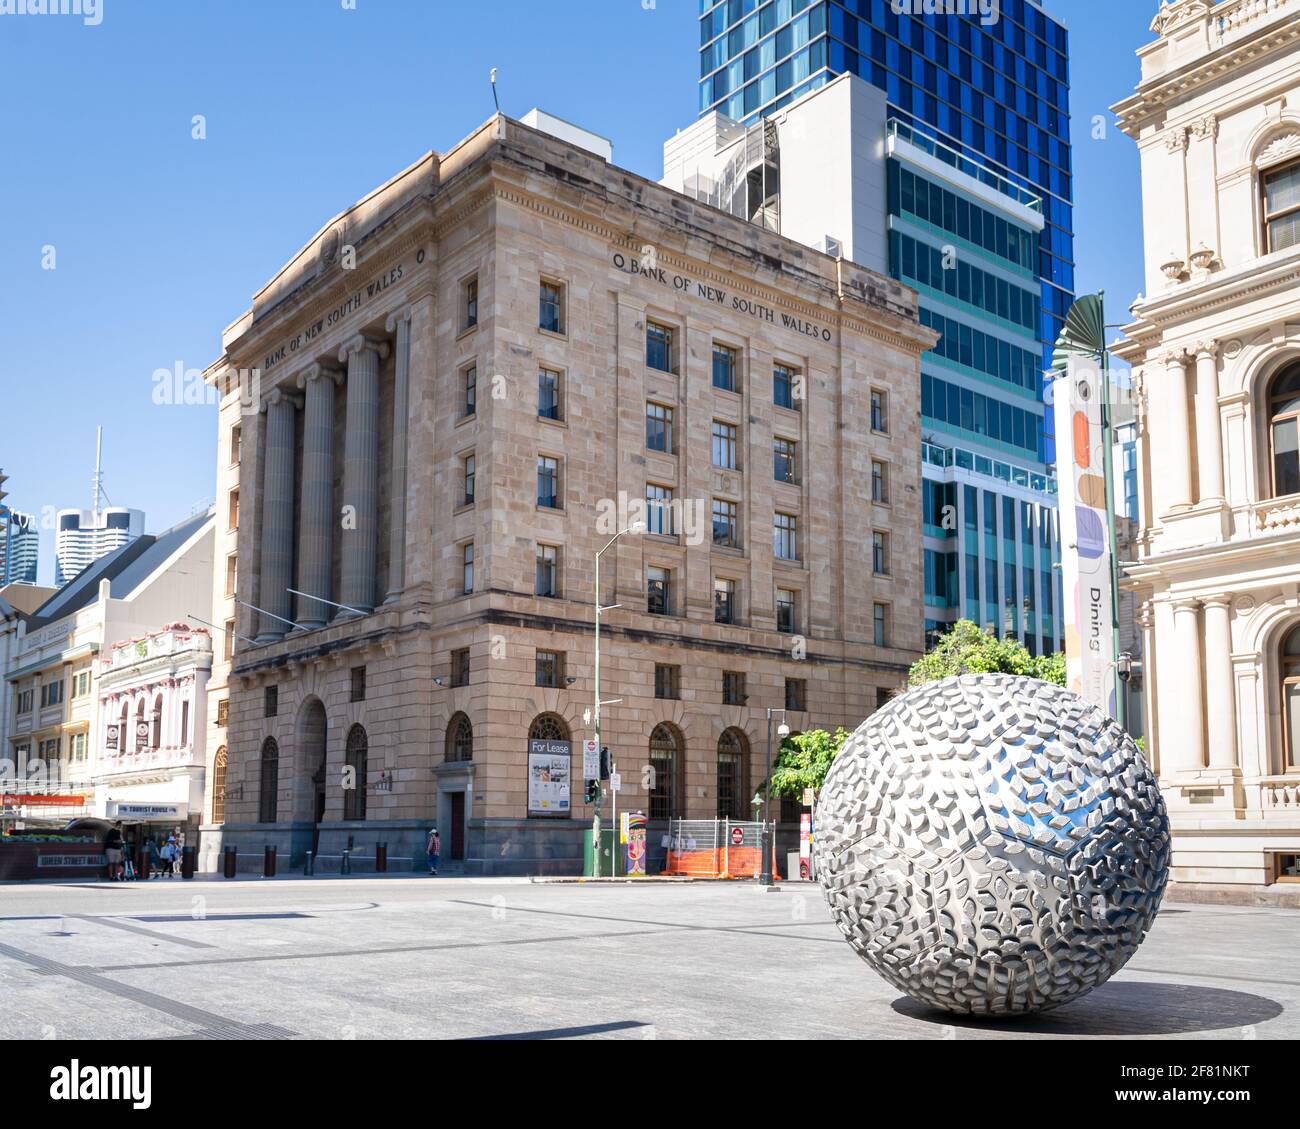 Brisbane, Queensland, Australia- 10 April 2021: The Bank of New South Wales Building located in Brisbane Stock Photo